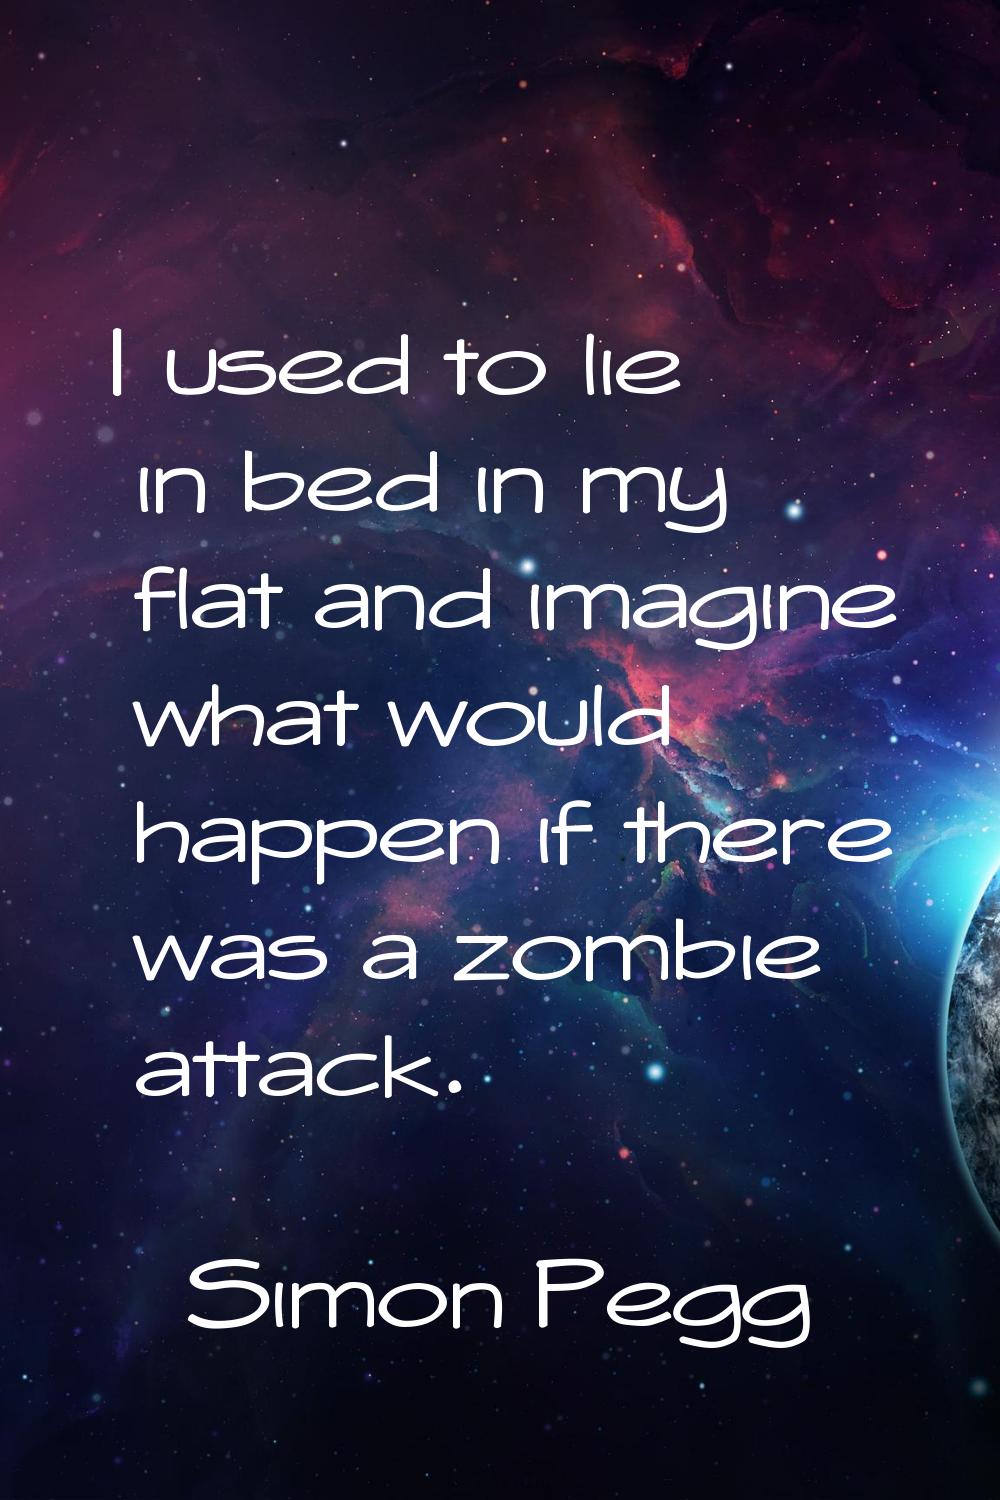 I used to lie in bed in my flat and imagine what would happen if there was a zombie attack.